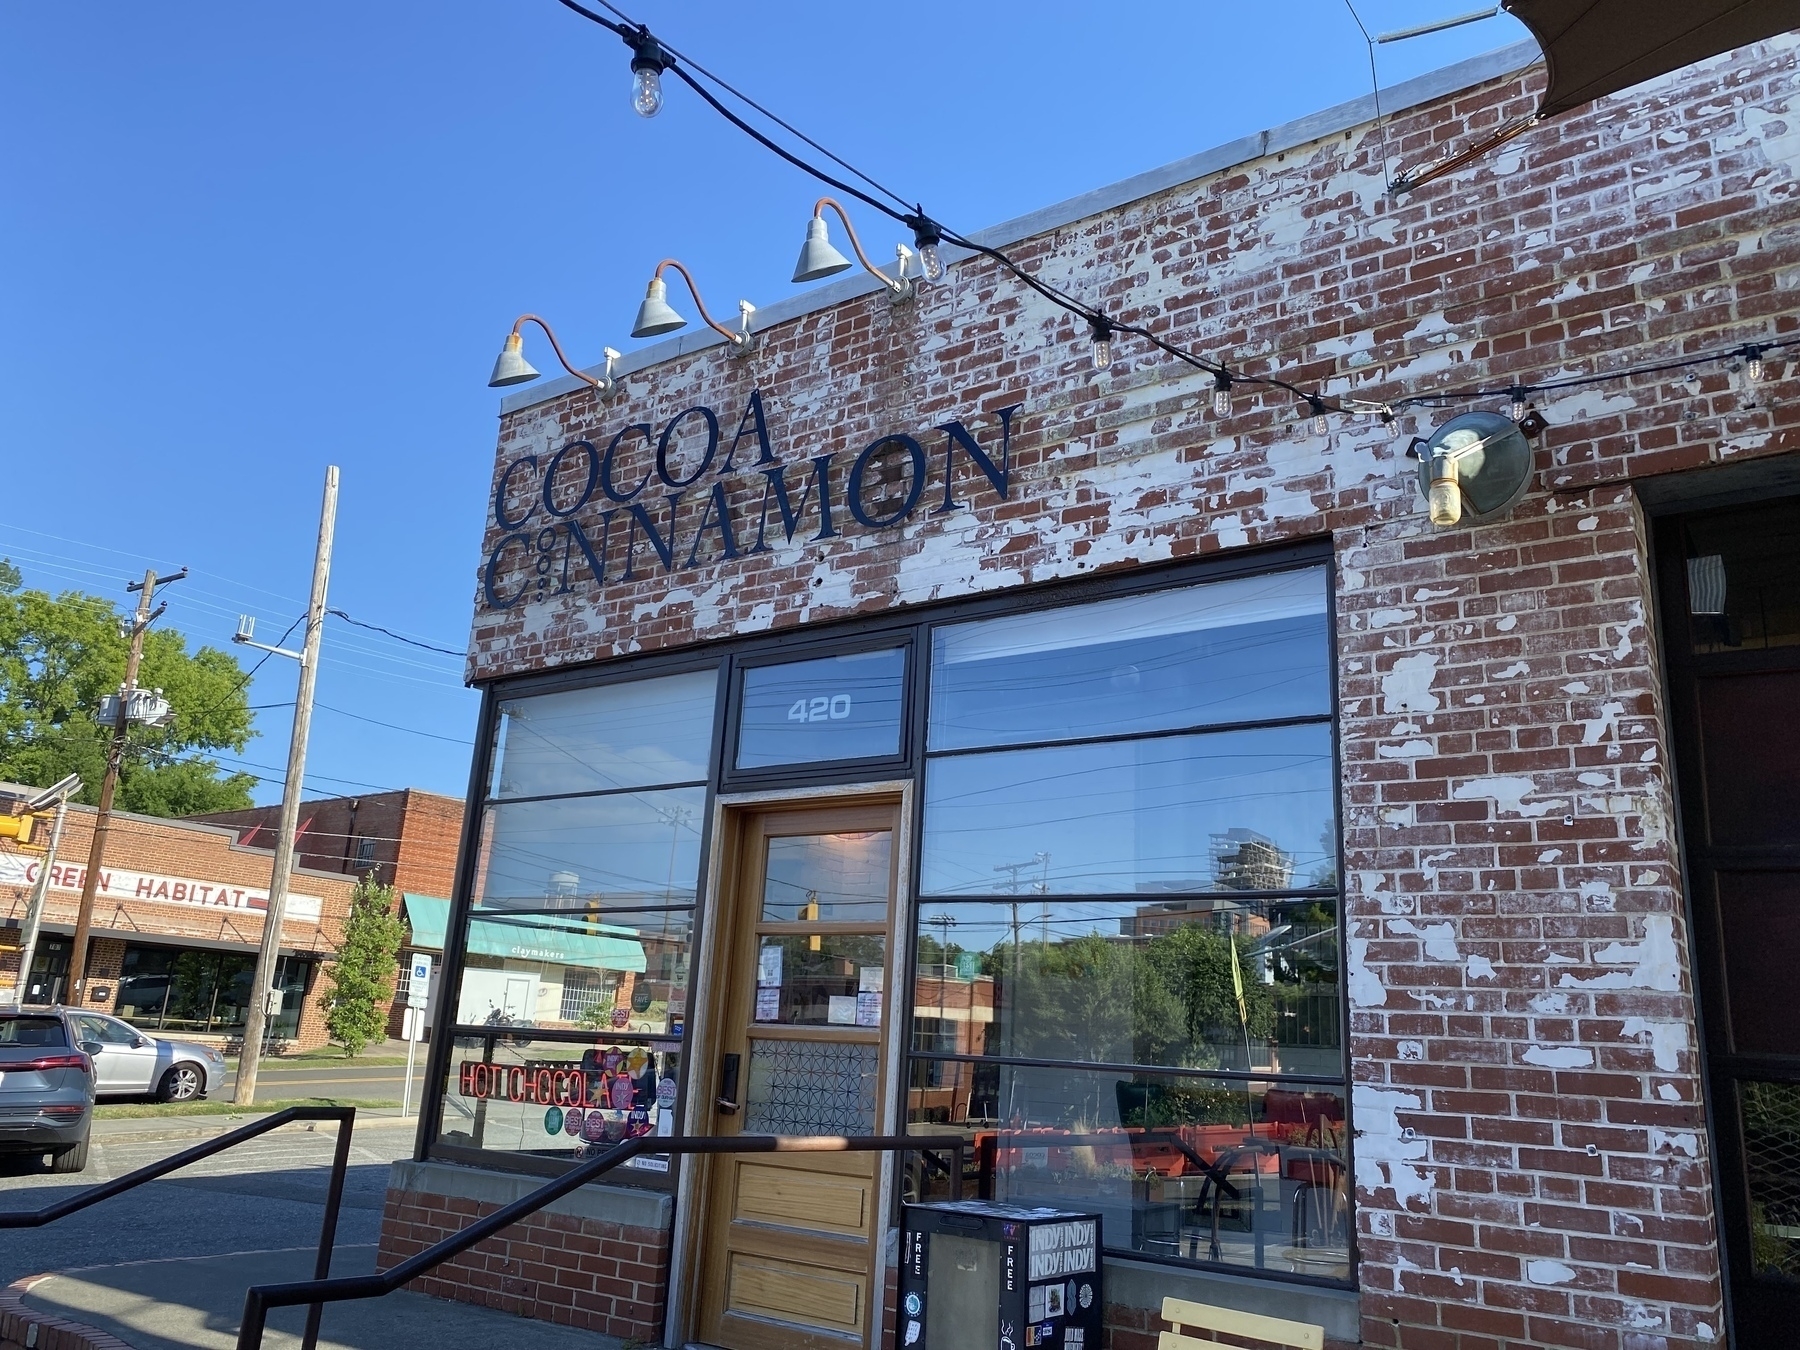 Picture of a coffee shop called Cocoa Cinnamon in downtown Durham, NC.